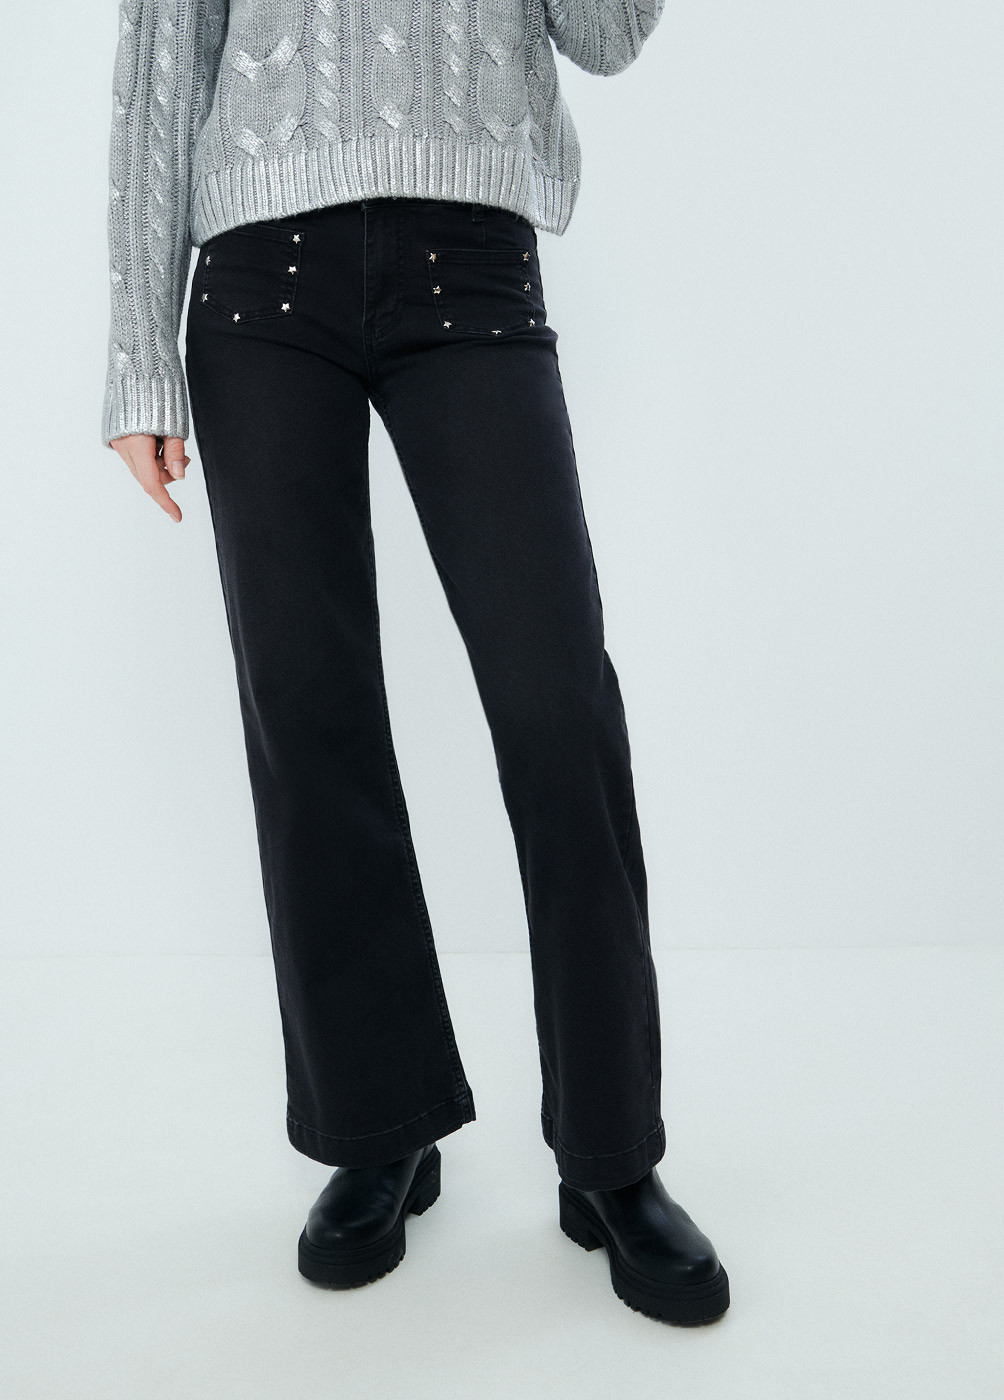 CULOTTE JEANS WITH STARS